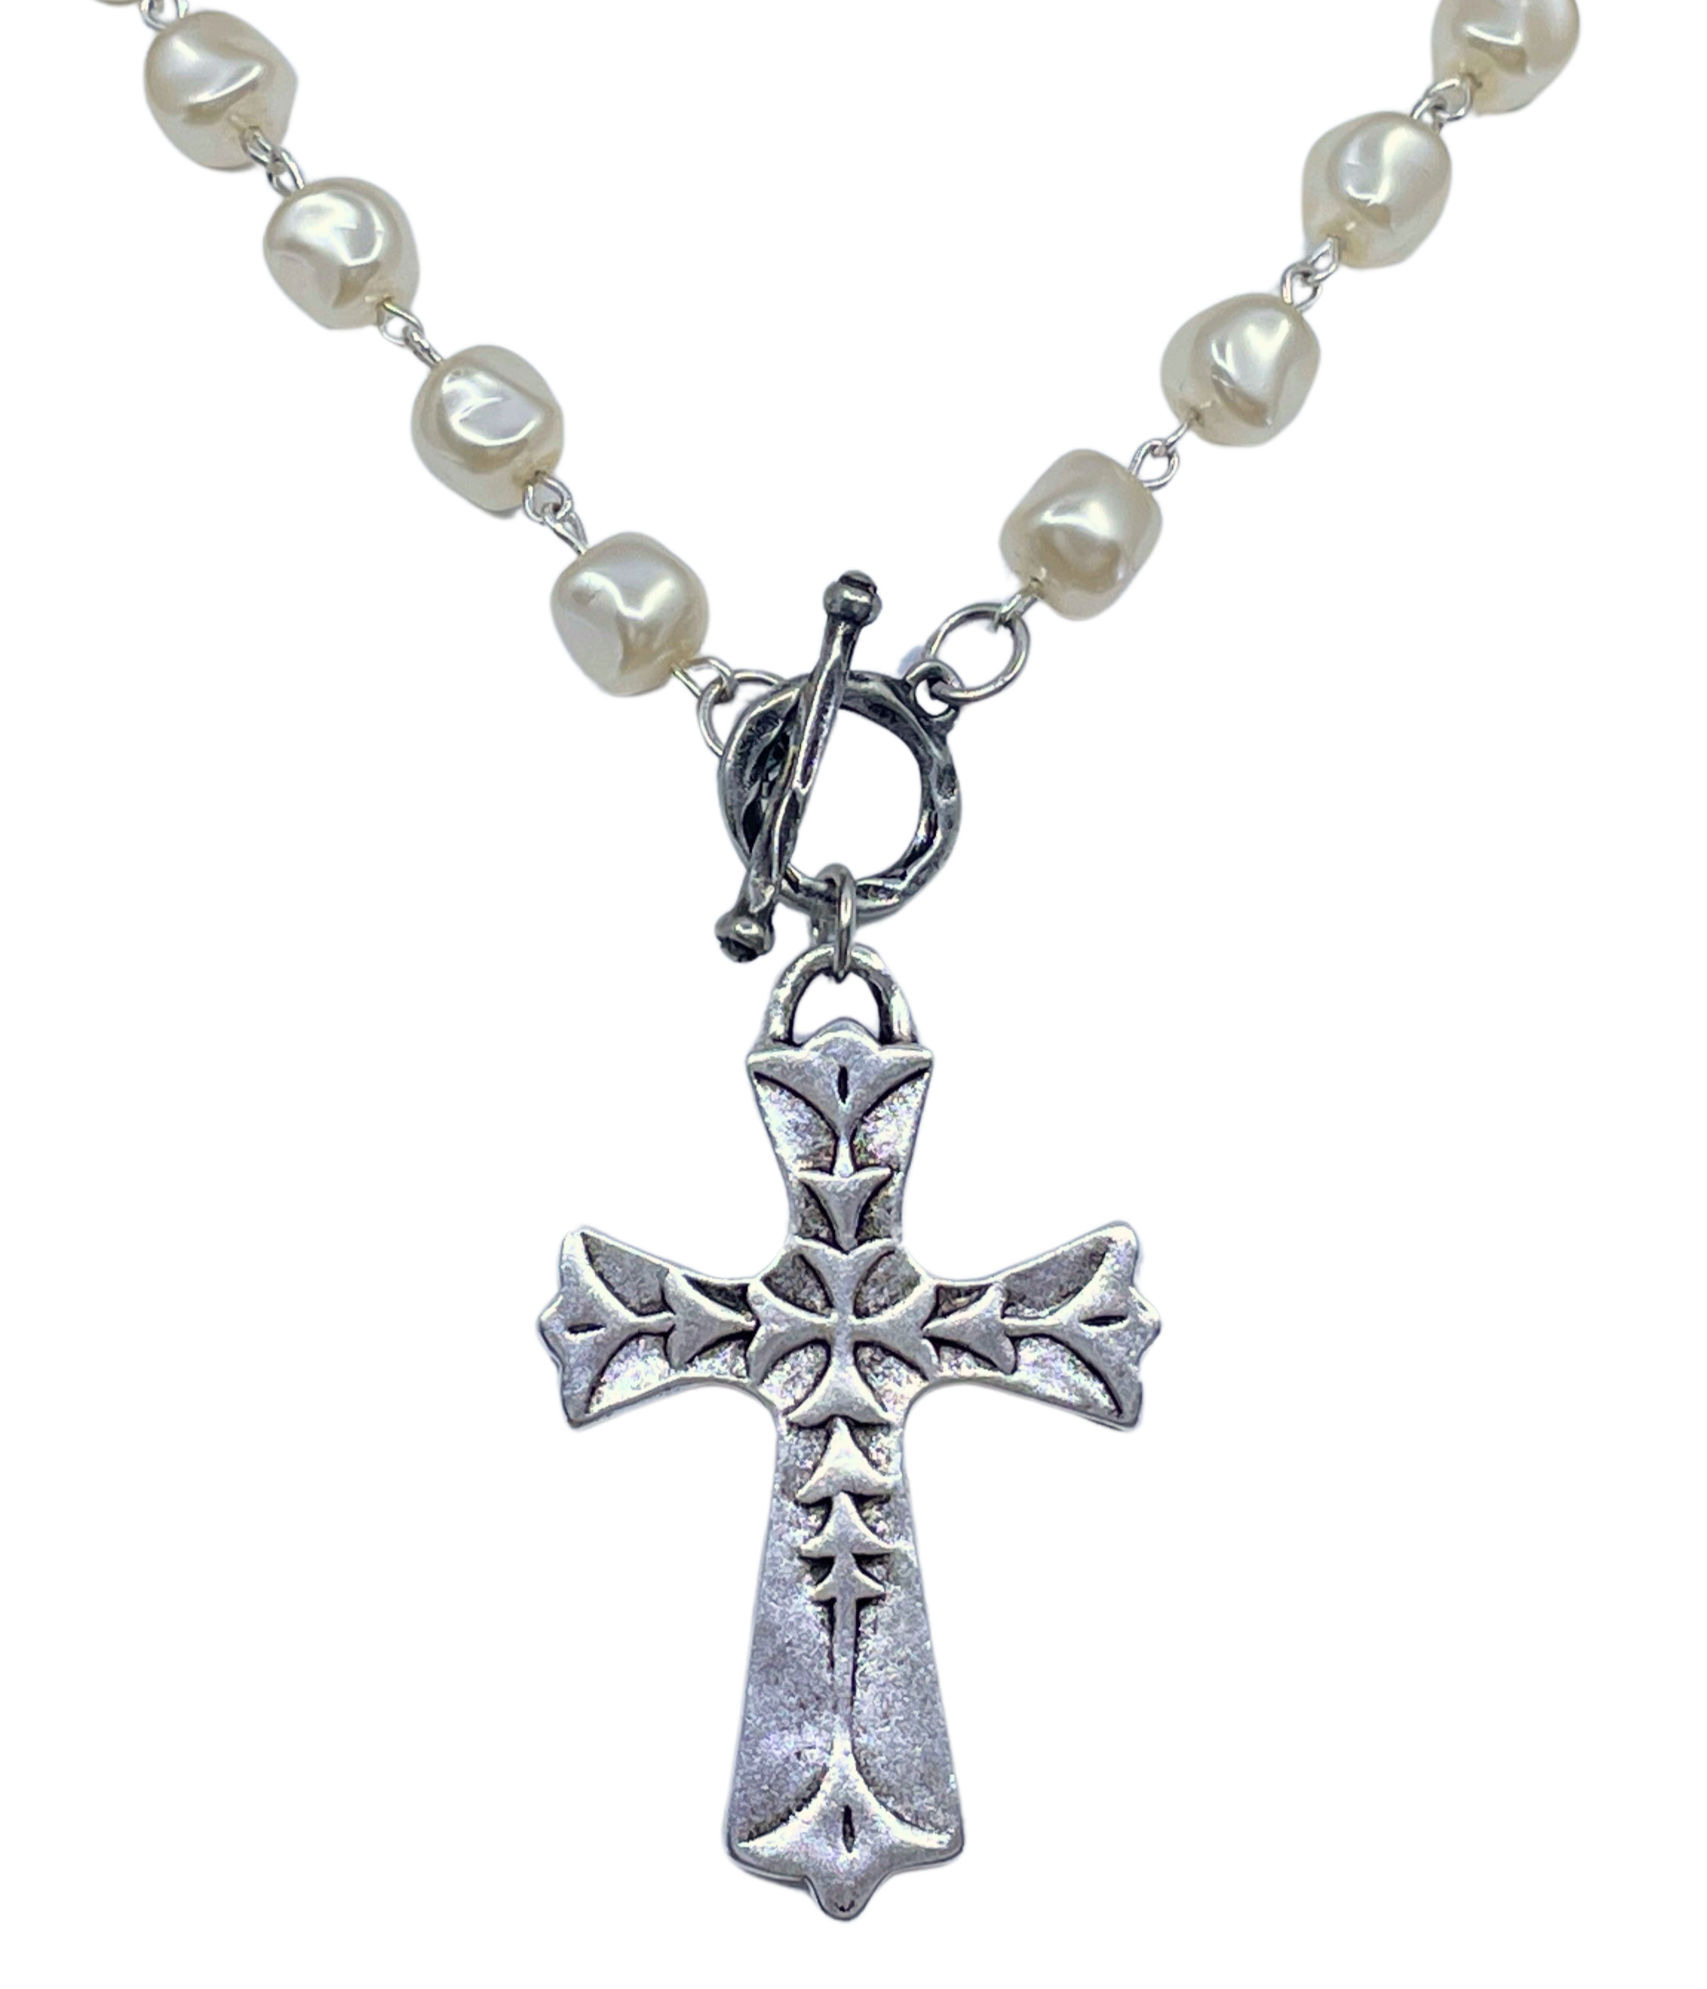 Vintage Pearl Silver Chain and Toggle with Vintage Silver Cross Pendant